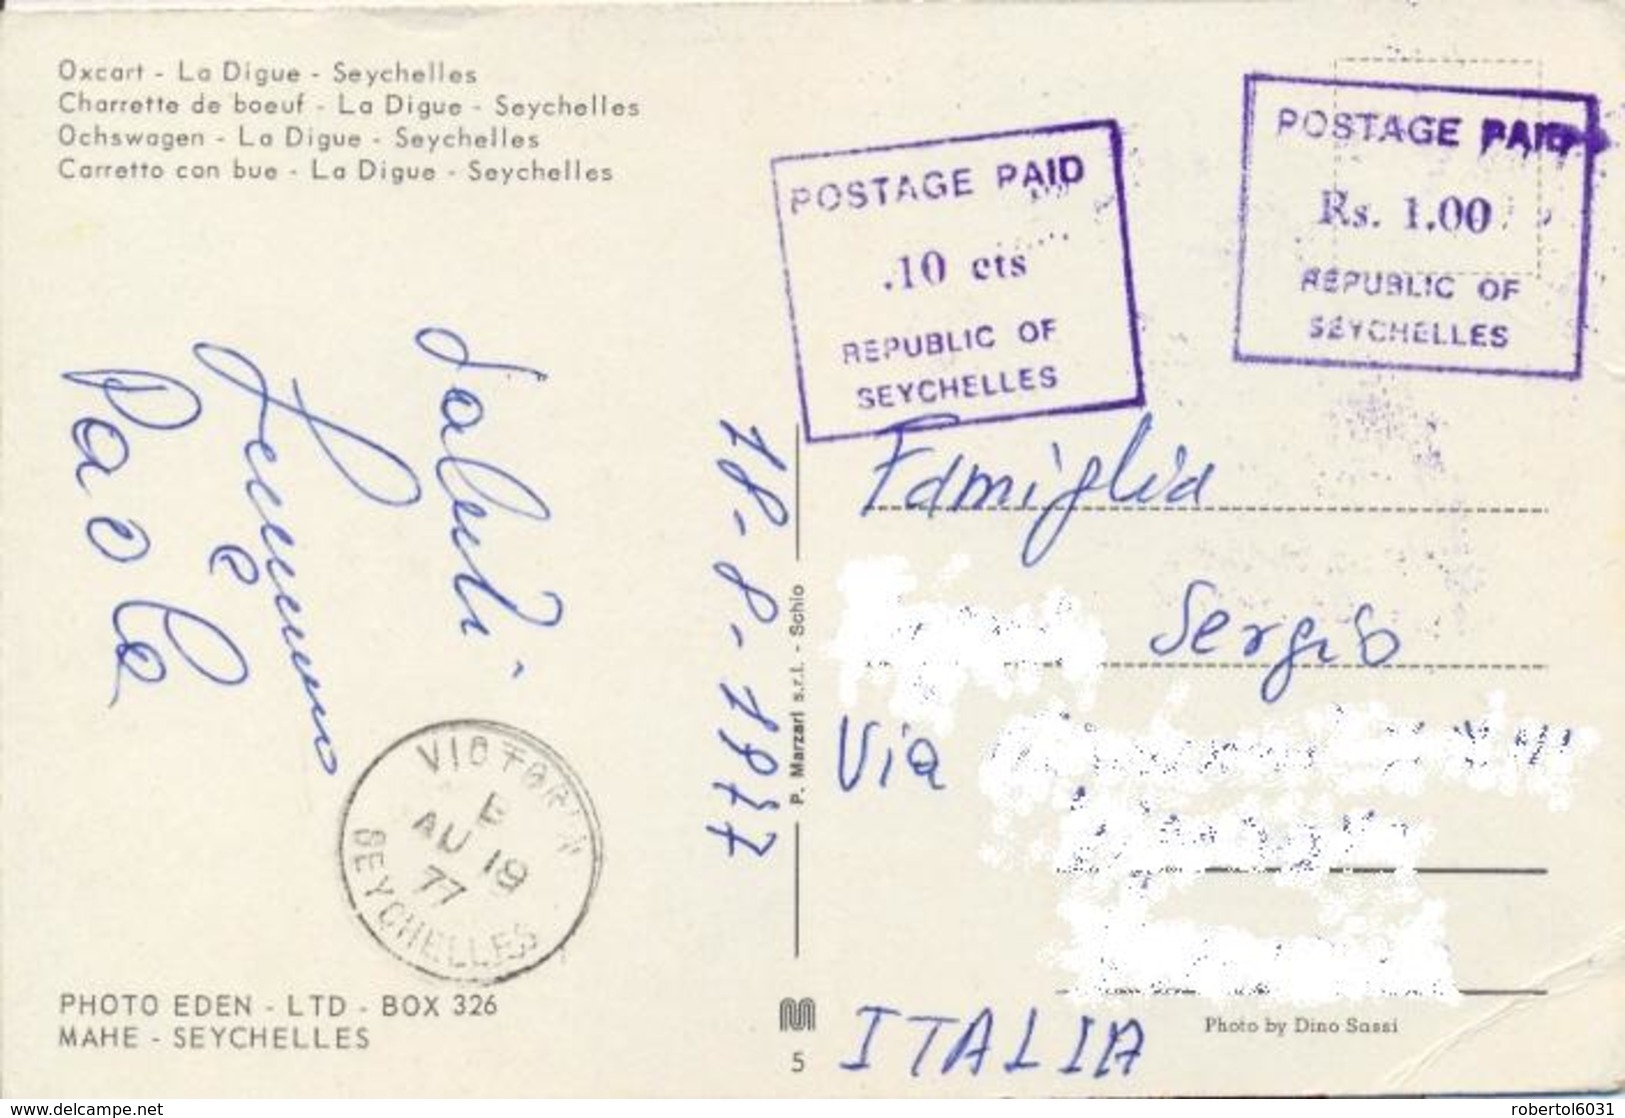 Seychelles 1977 Picture Postcard To Italy With Handstamps Postage Paid 10 C. + 1 Rs. - Seychellen (1976-...)